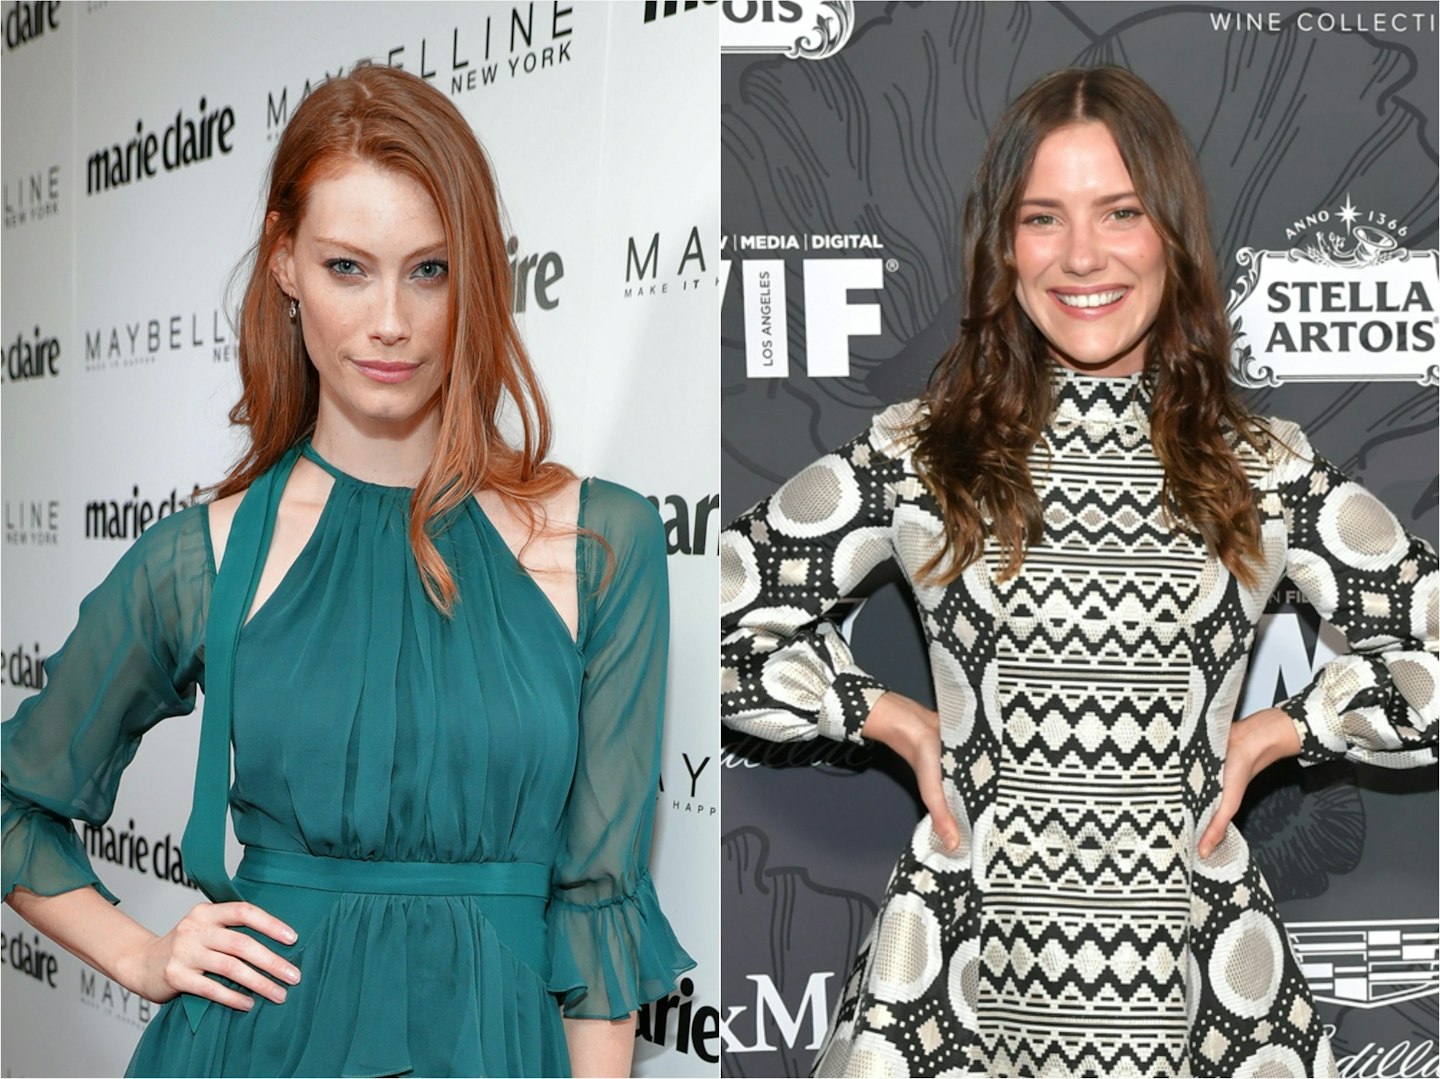 EVIL DEAD RISE Interview with actors Alyssa Sutherland and Lily Sullivan 